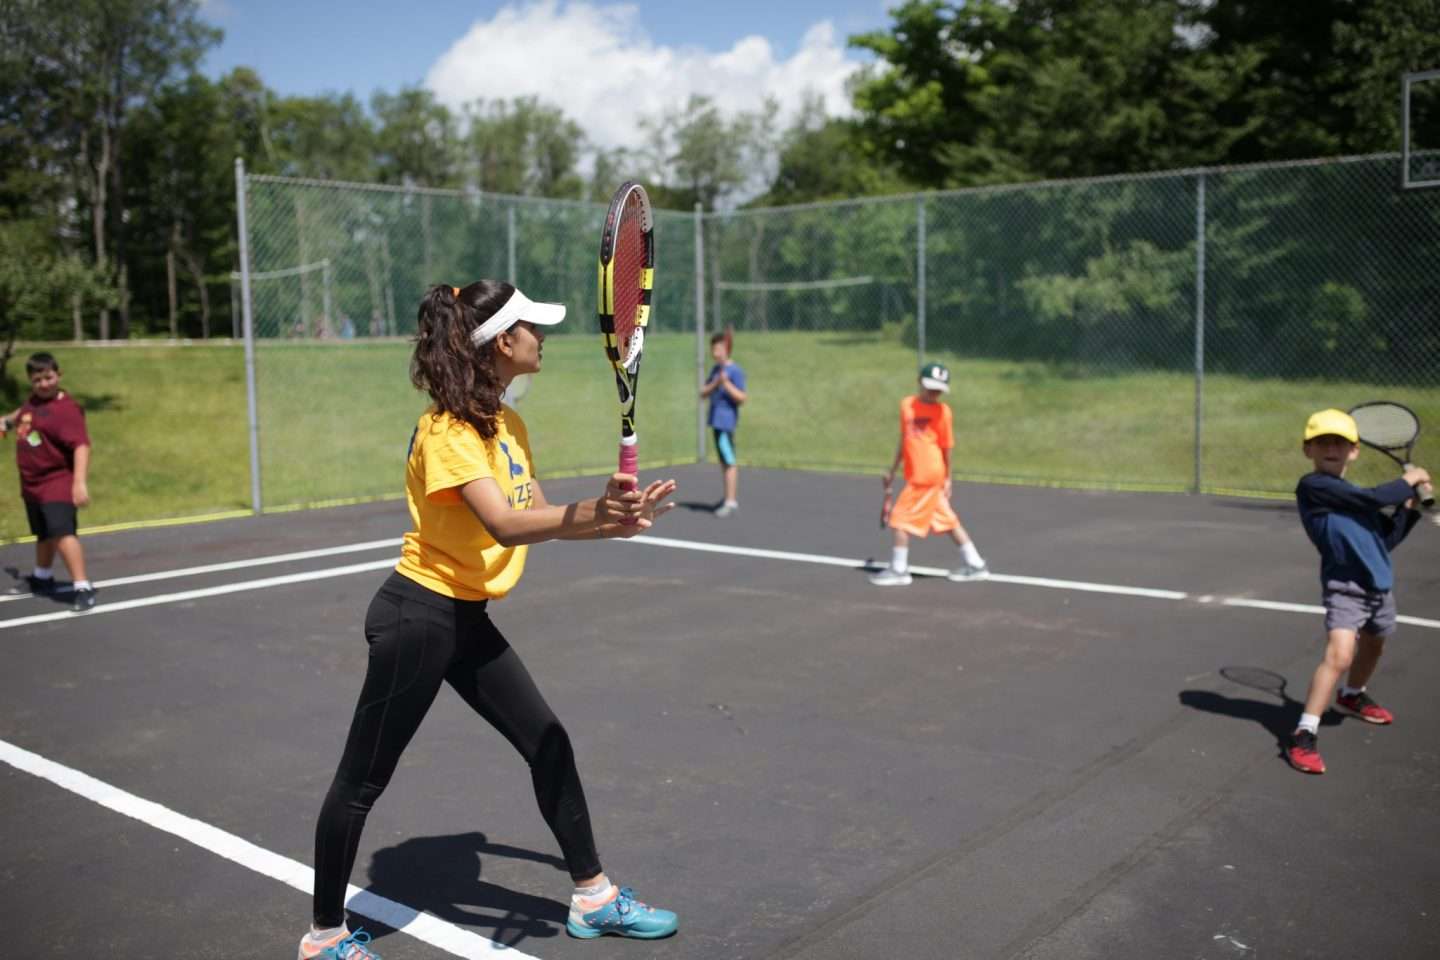 One of the camp counselors playing tennis with campers